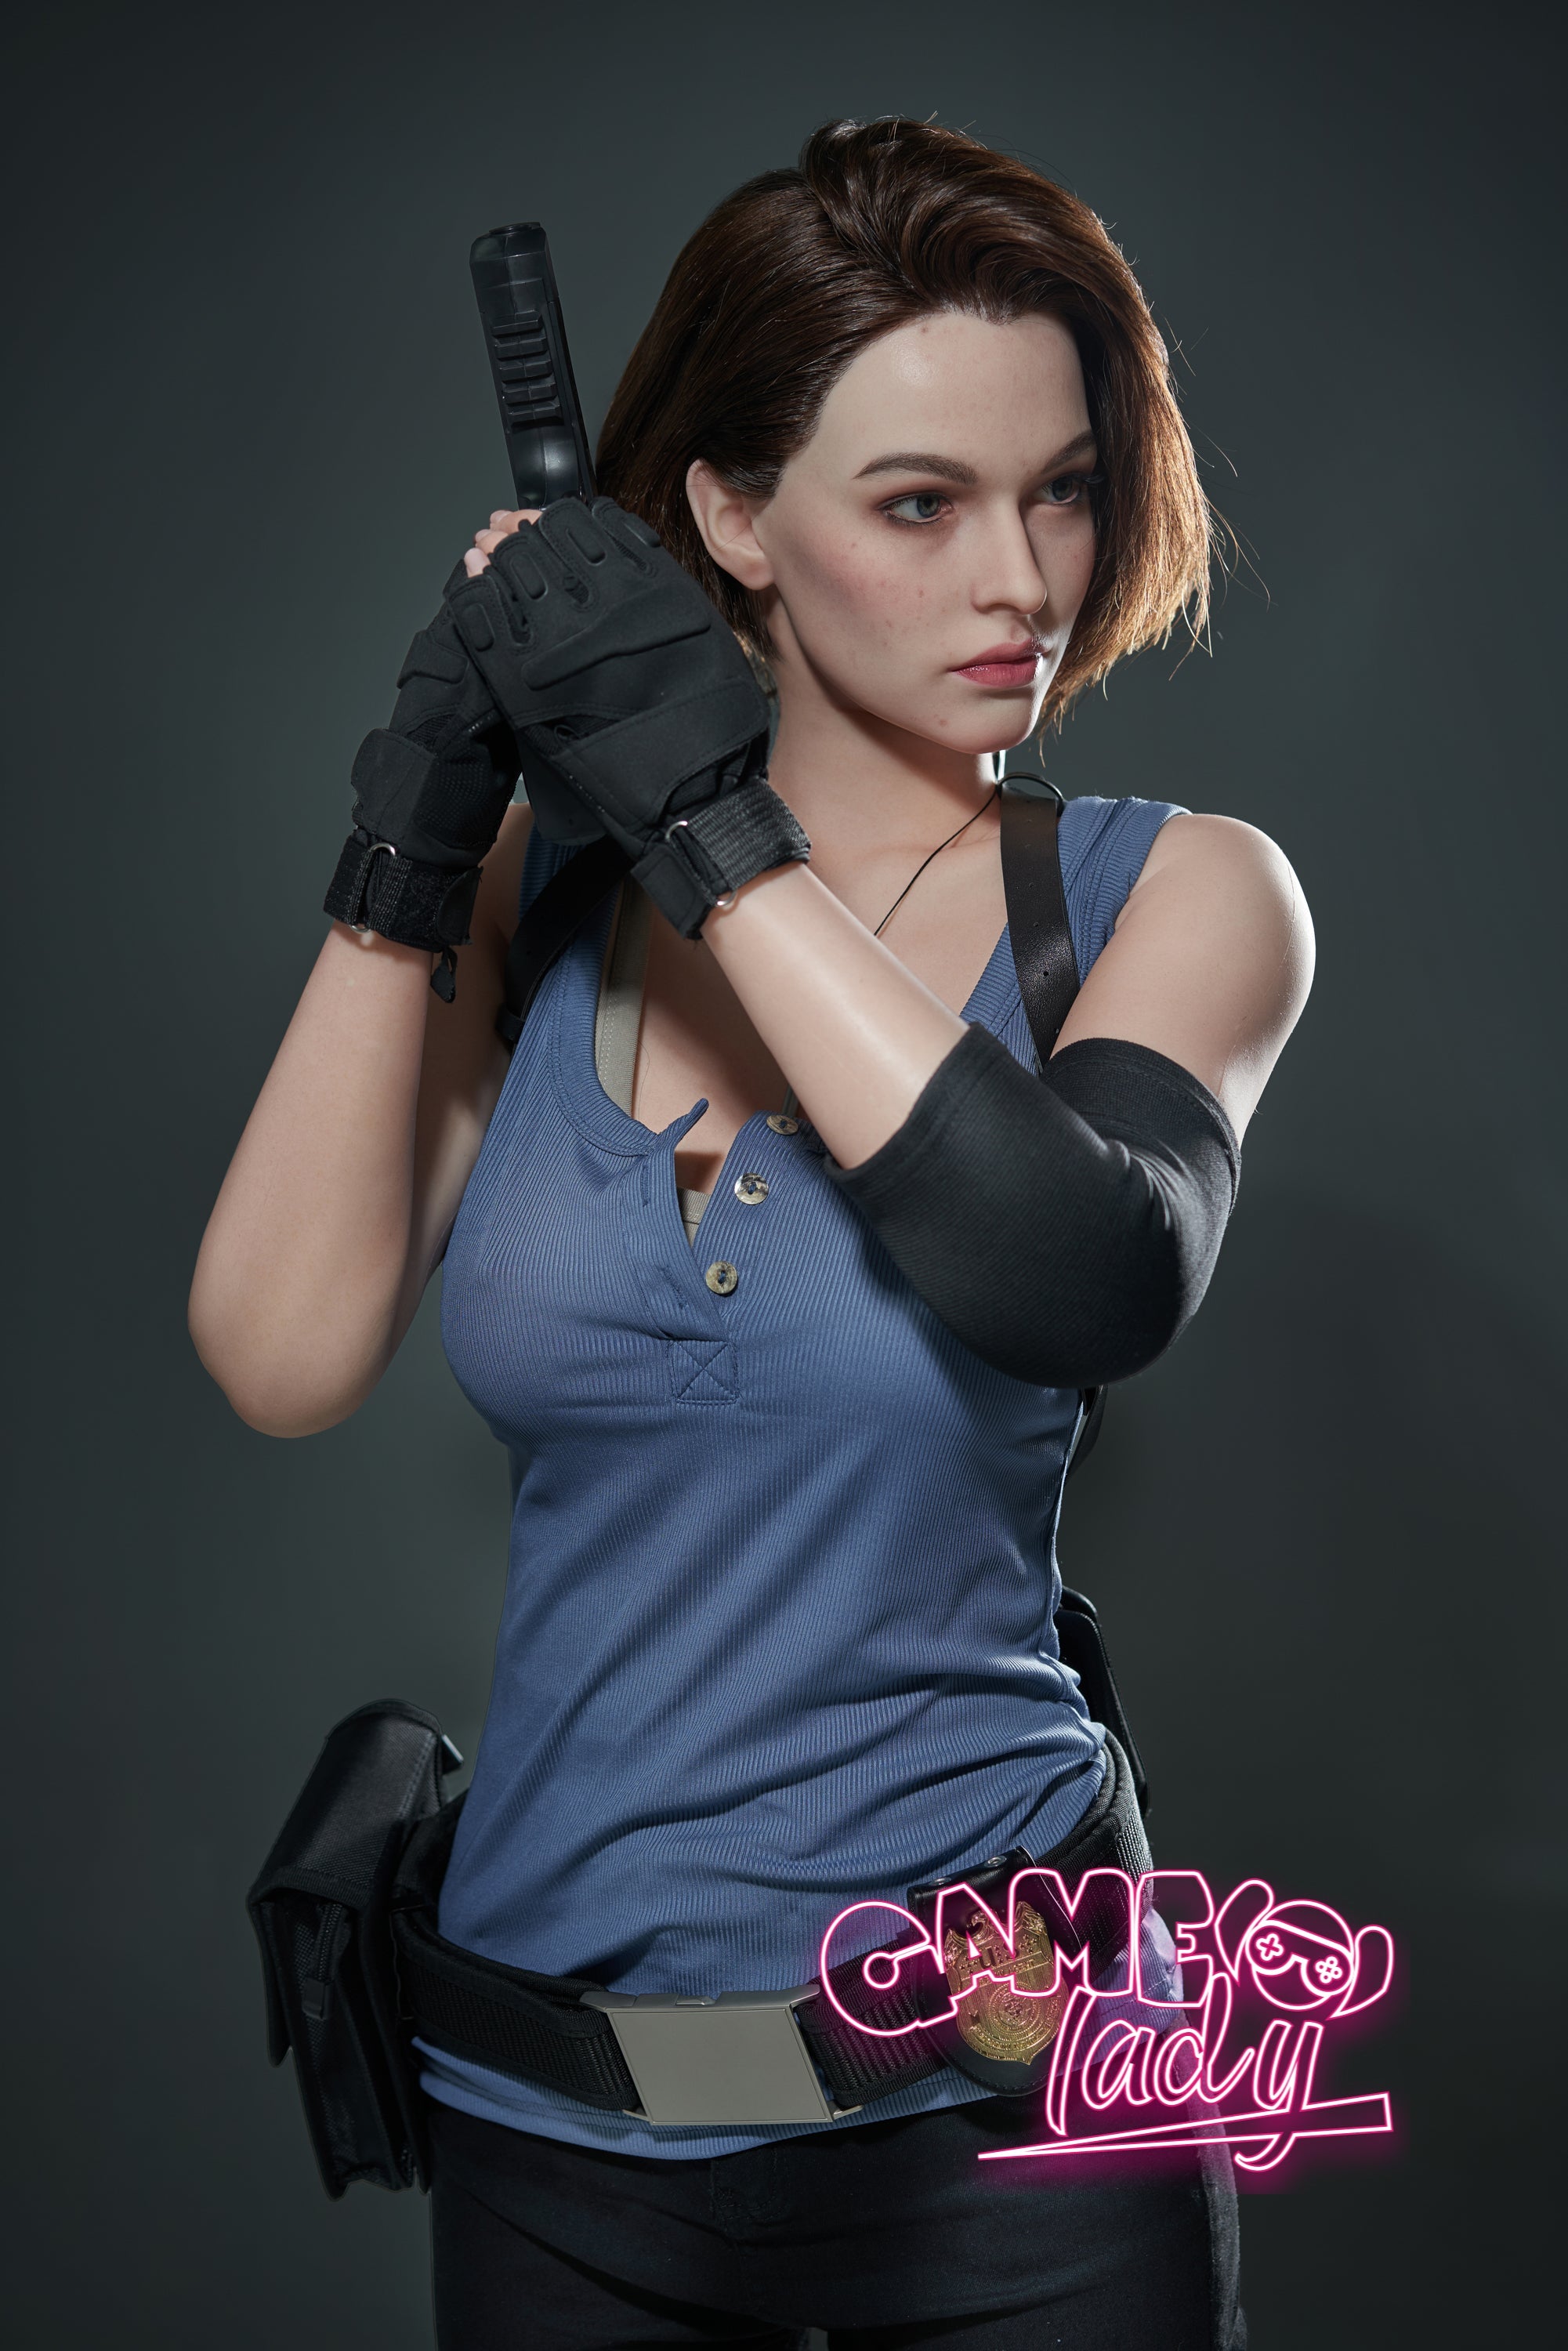 Game Lady 168 cm Silicone - Jill Valentine | Buy Sex Dolls at DOLLS ACTUALLY